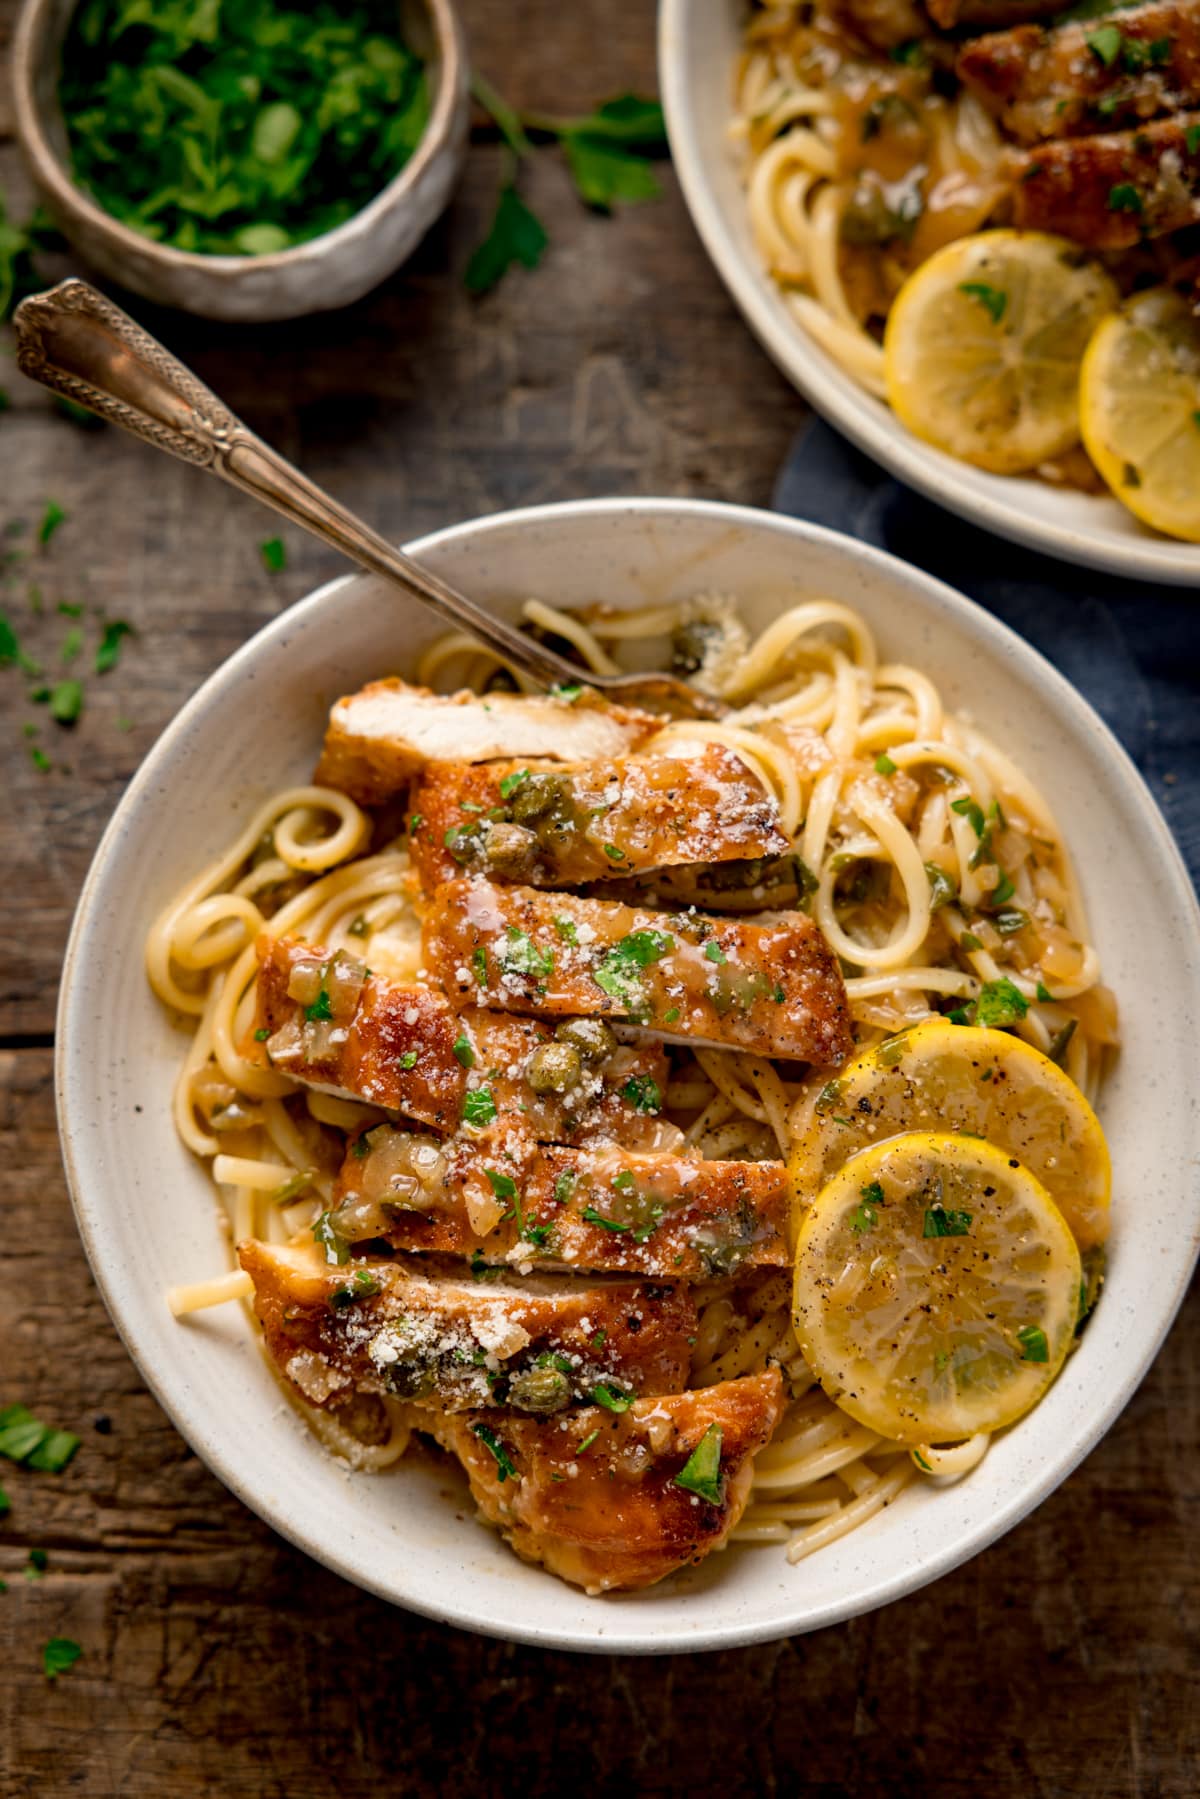 Tall overhead image of lemon chicken piccata on a bed of linguine with slices of lemon in a white bowl. The chicken has been sliced into strips and there is a fork sticking out. The bowl is on a wooden table next to a small bowl of herbs. There is a further bowl of lemon chicken piccata just in shot at the top of the frame.